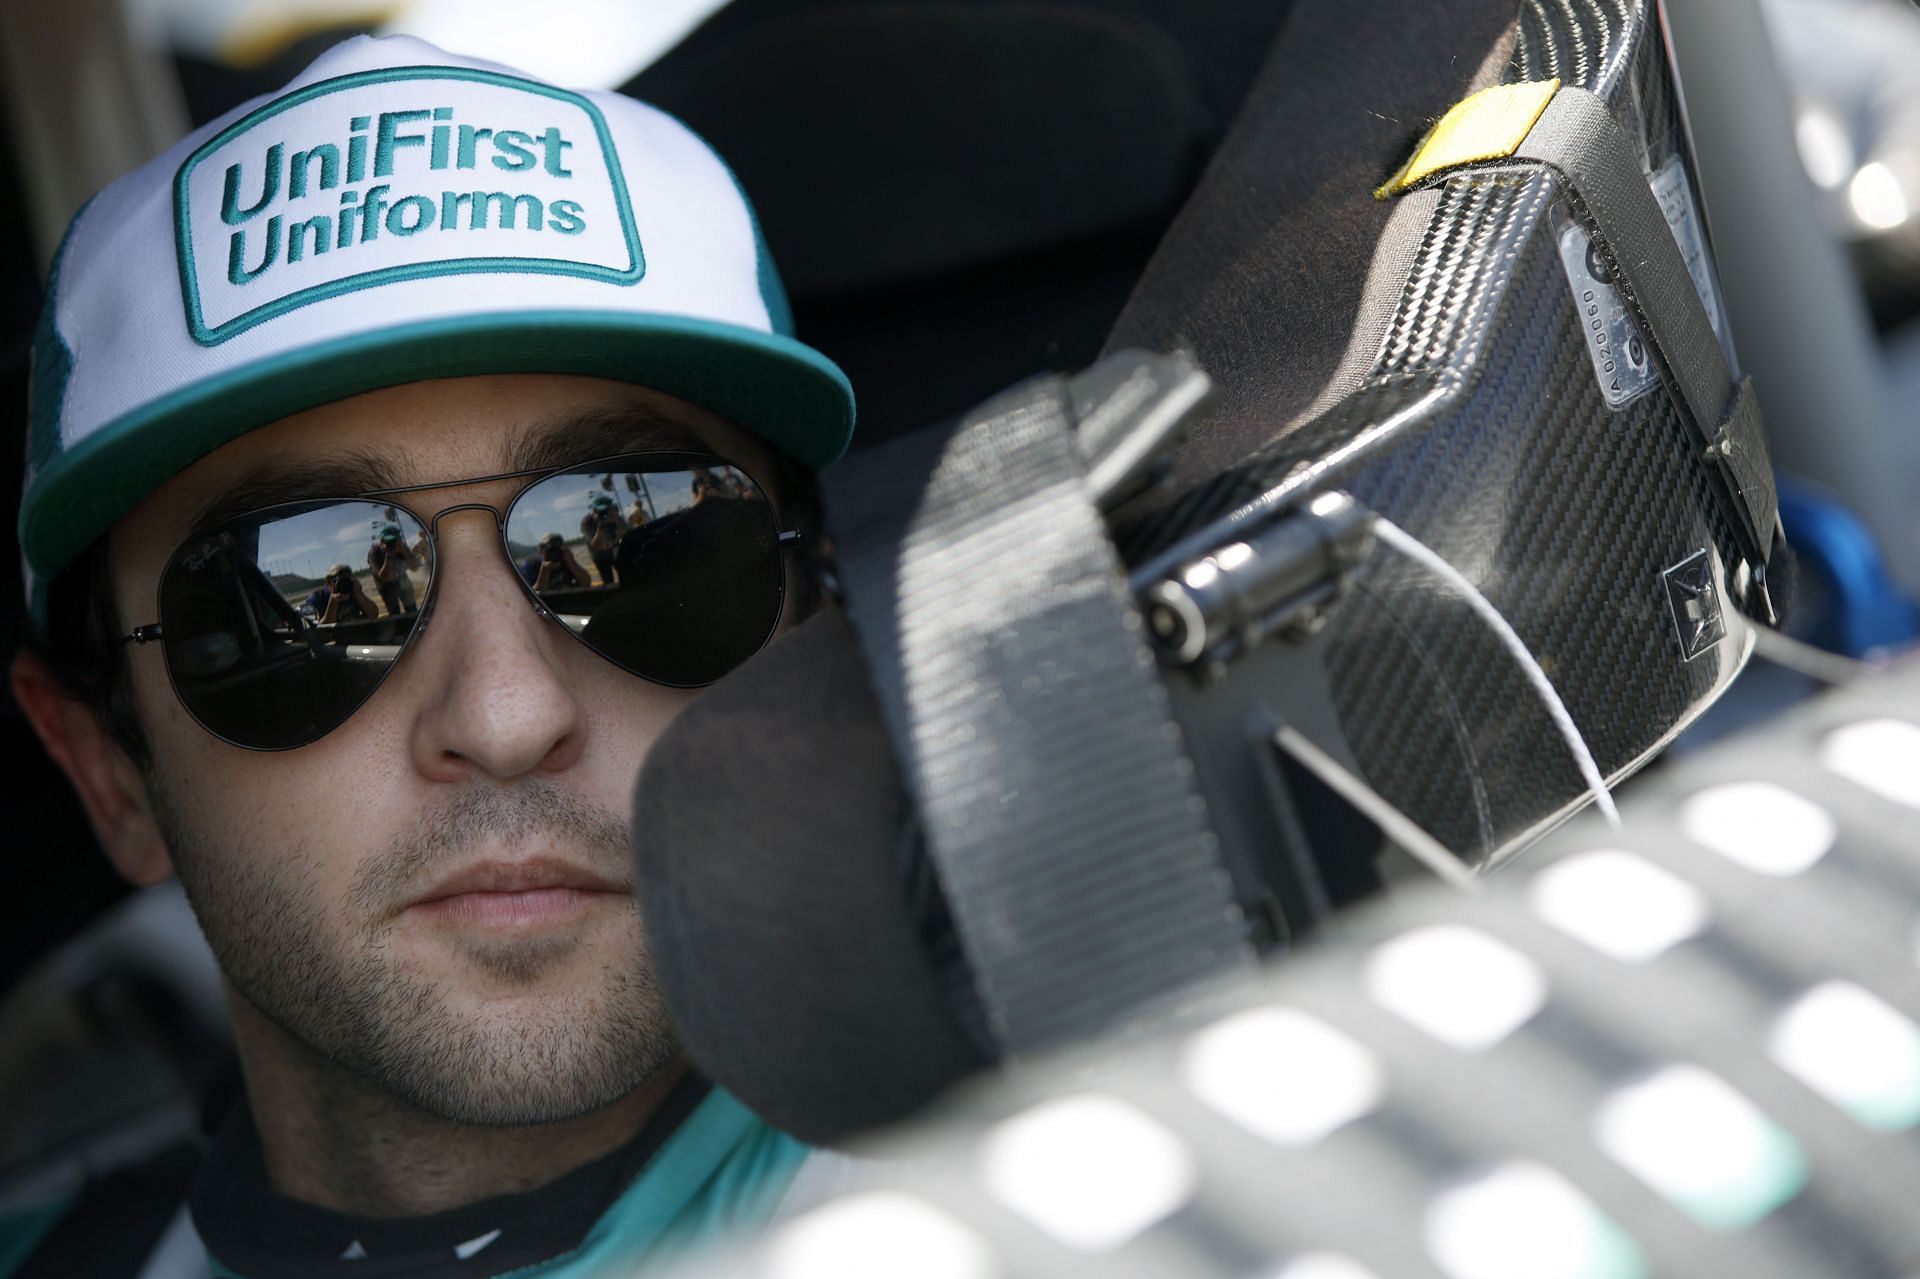 Chase Elliott sits in his car during practice for the 2022 NASCAR Cup Series AdventHealth 400 at Kansas Speedway in Kansas City, Kansas. (Photo by Sean Gardner/Getty Images)